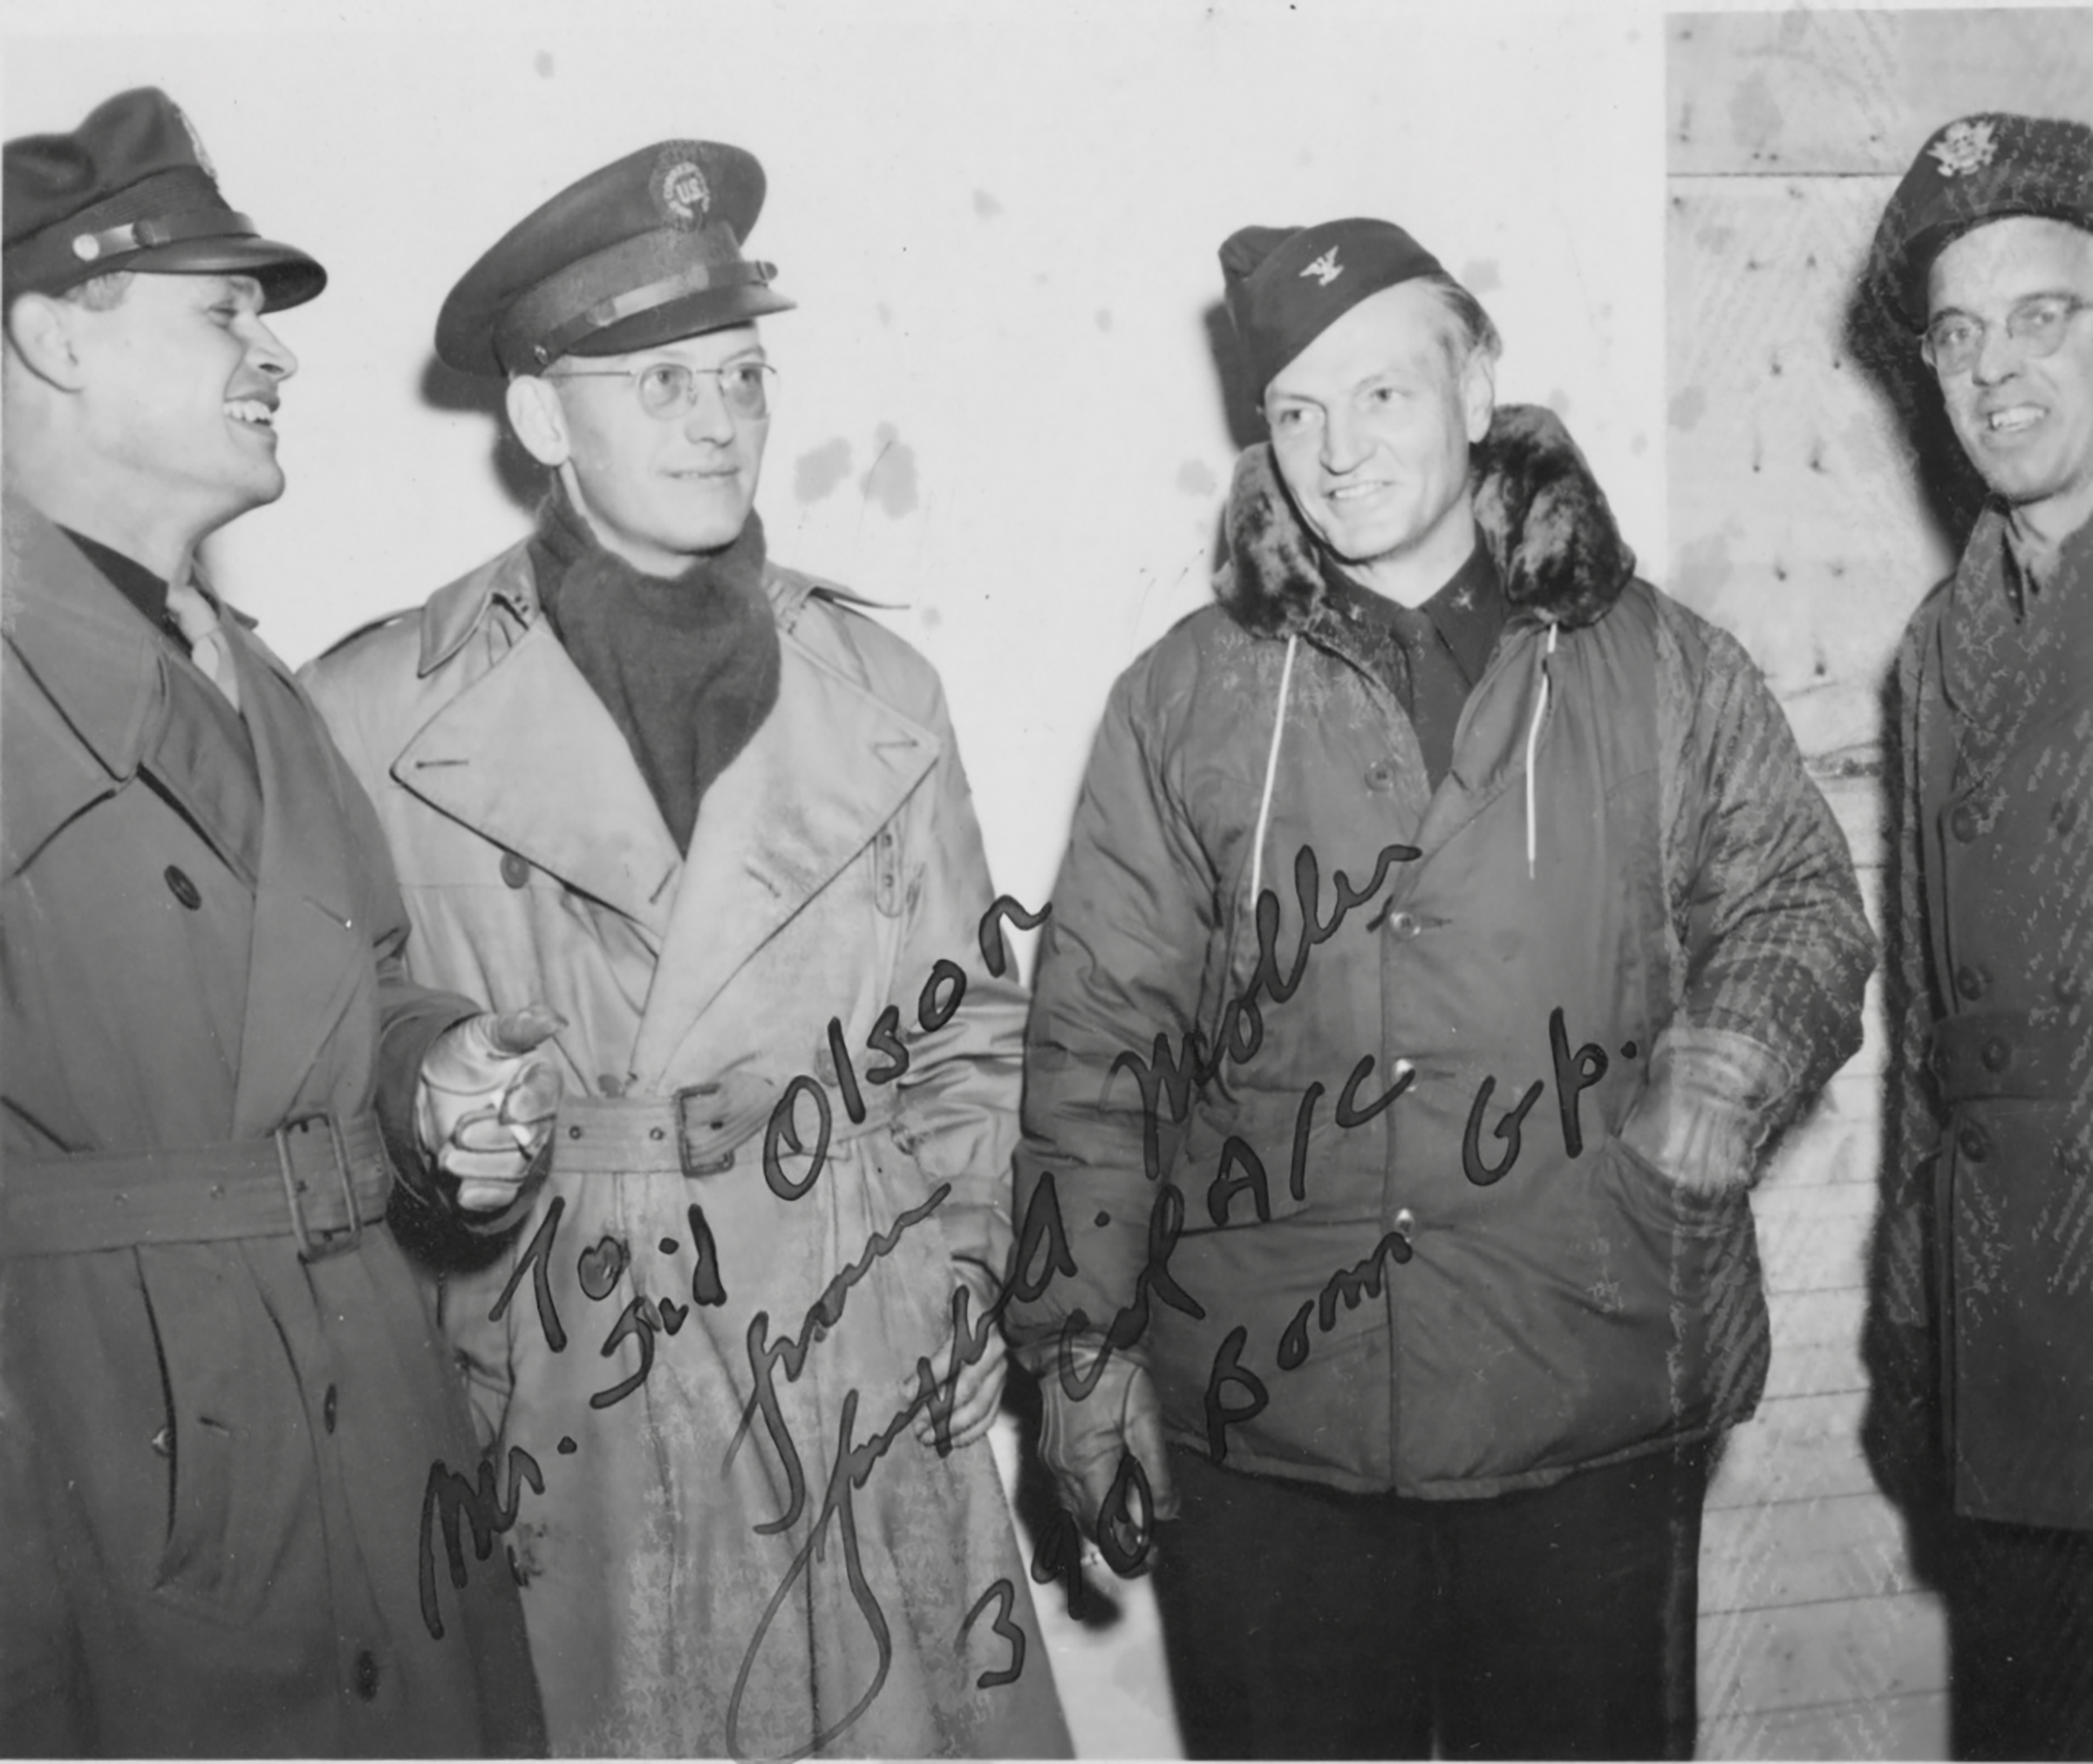 Olson (second from left) visiting U.S. troops somewhere in England in January 1945 and standing next to the 390th Bomb Group's commander Colonel Joseph A. Moller (second from right). (Courtesy of Sidney A. Olson Papers, Collection of Allen and Whitney Clark)